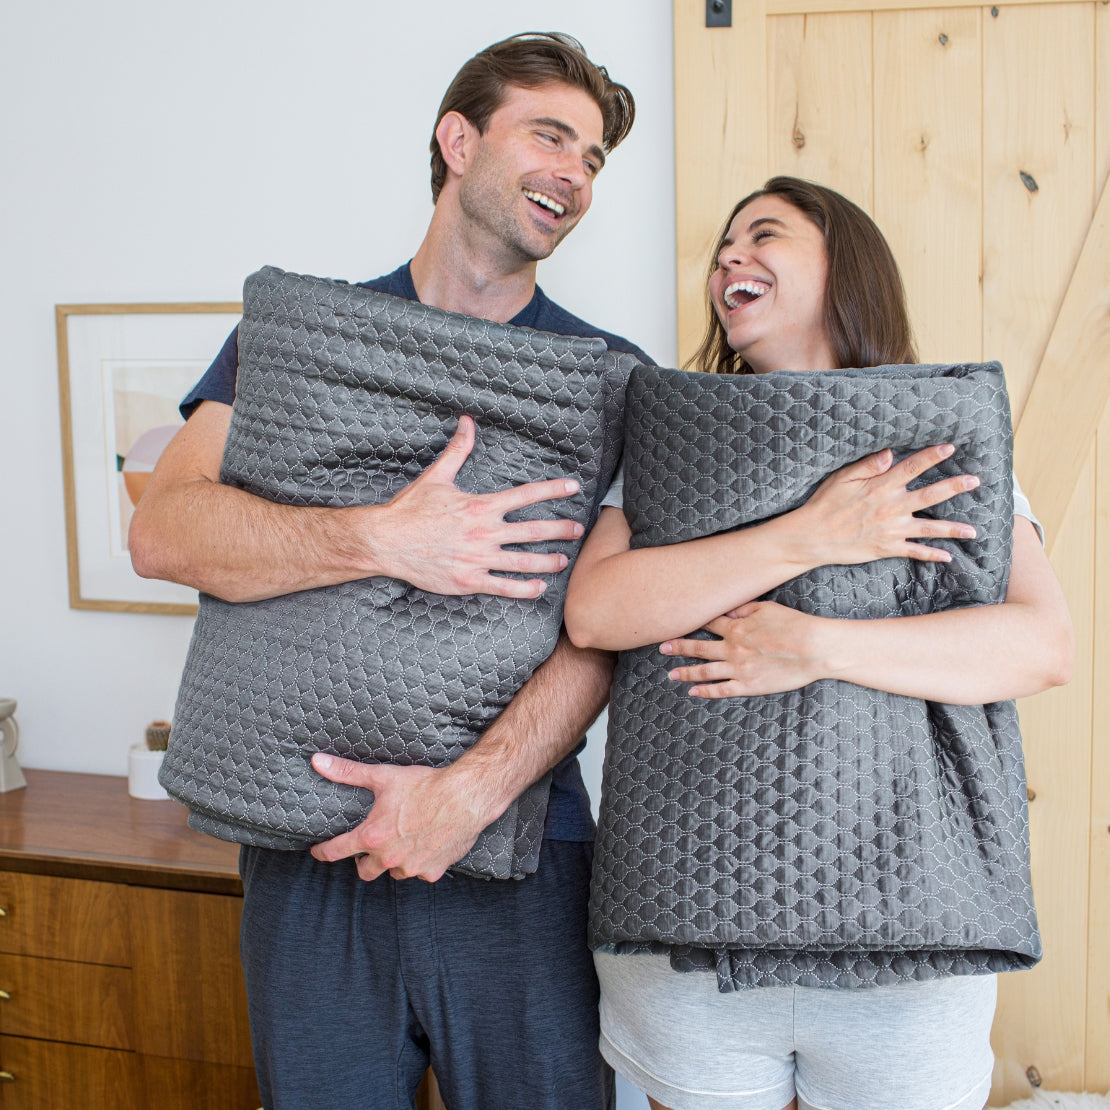 Two individuals joyfully holding large gray temperature-regulating blankets. The man on the left smiles and looks towards the woman, who is laughing. Both stand in a well-lit room with wooden features and minimalistic decor.